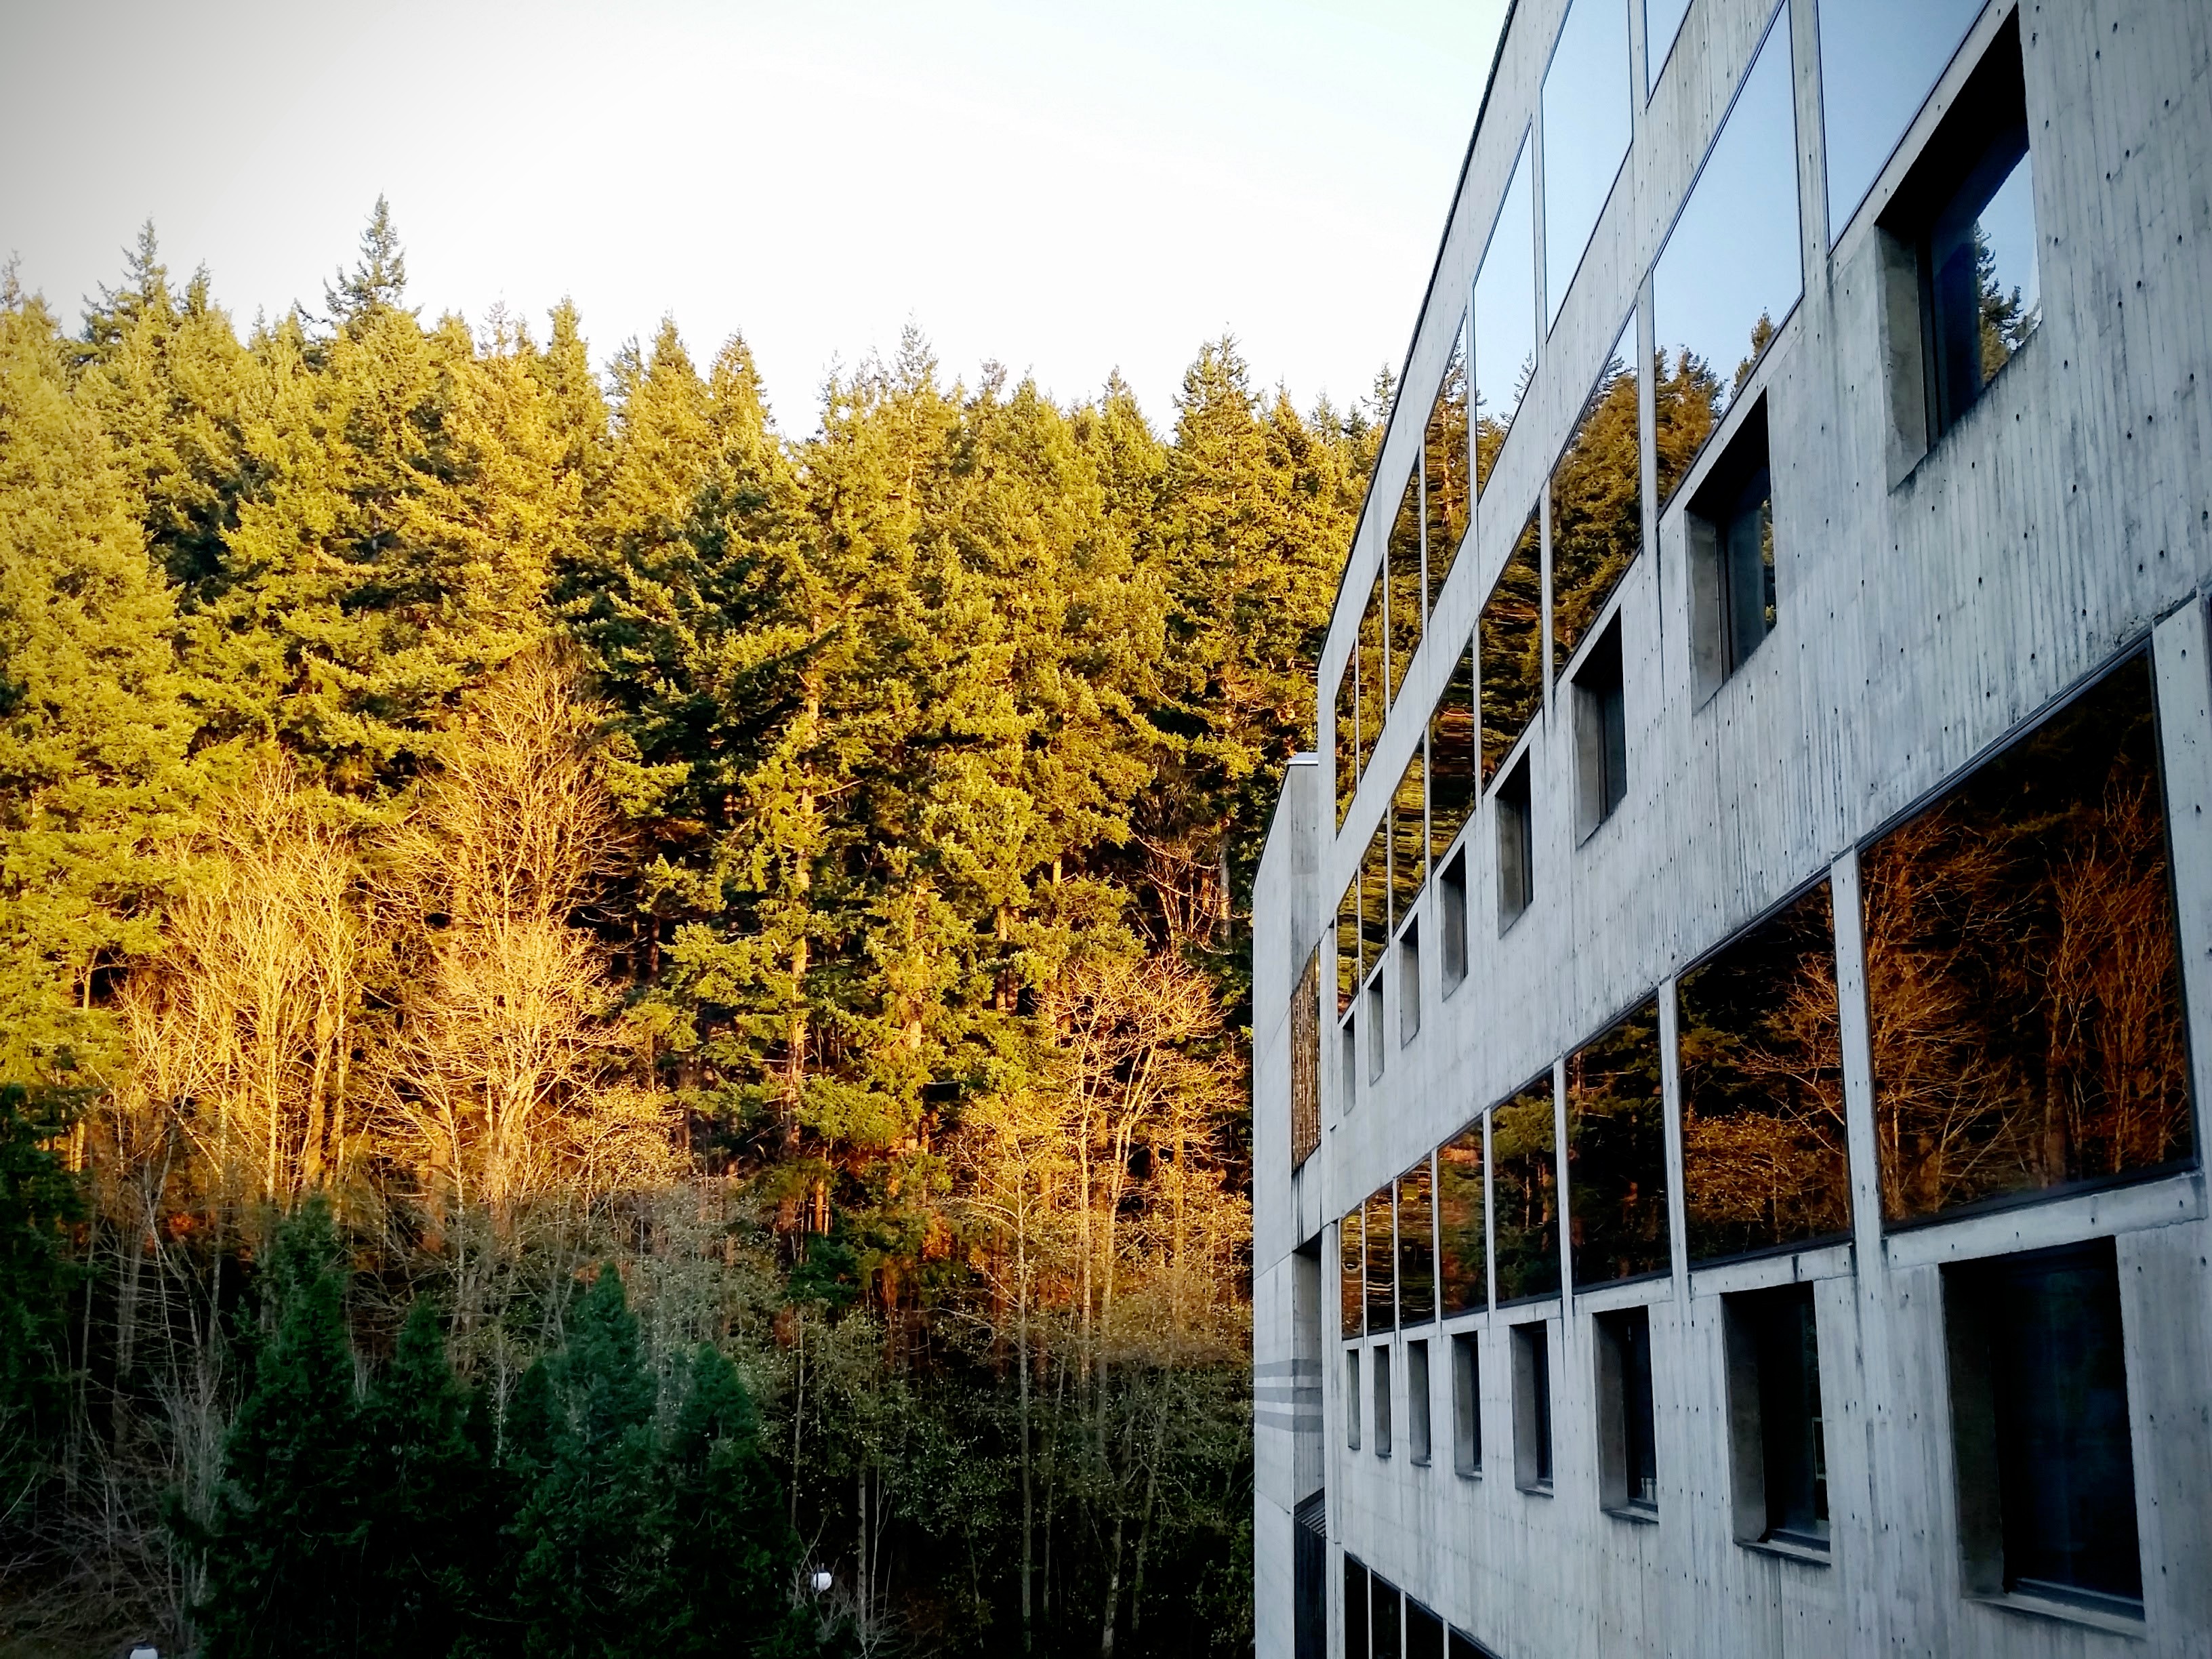 The environmental sciences building with the arboretum in the background